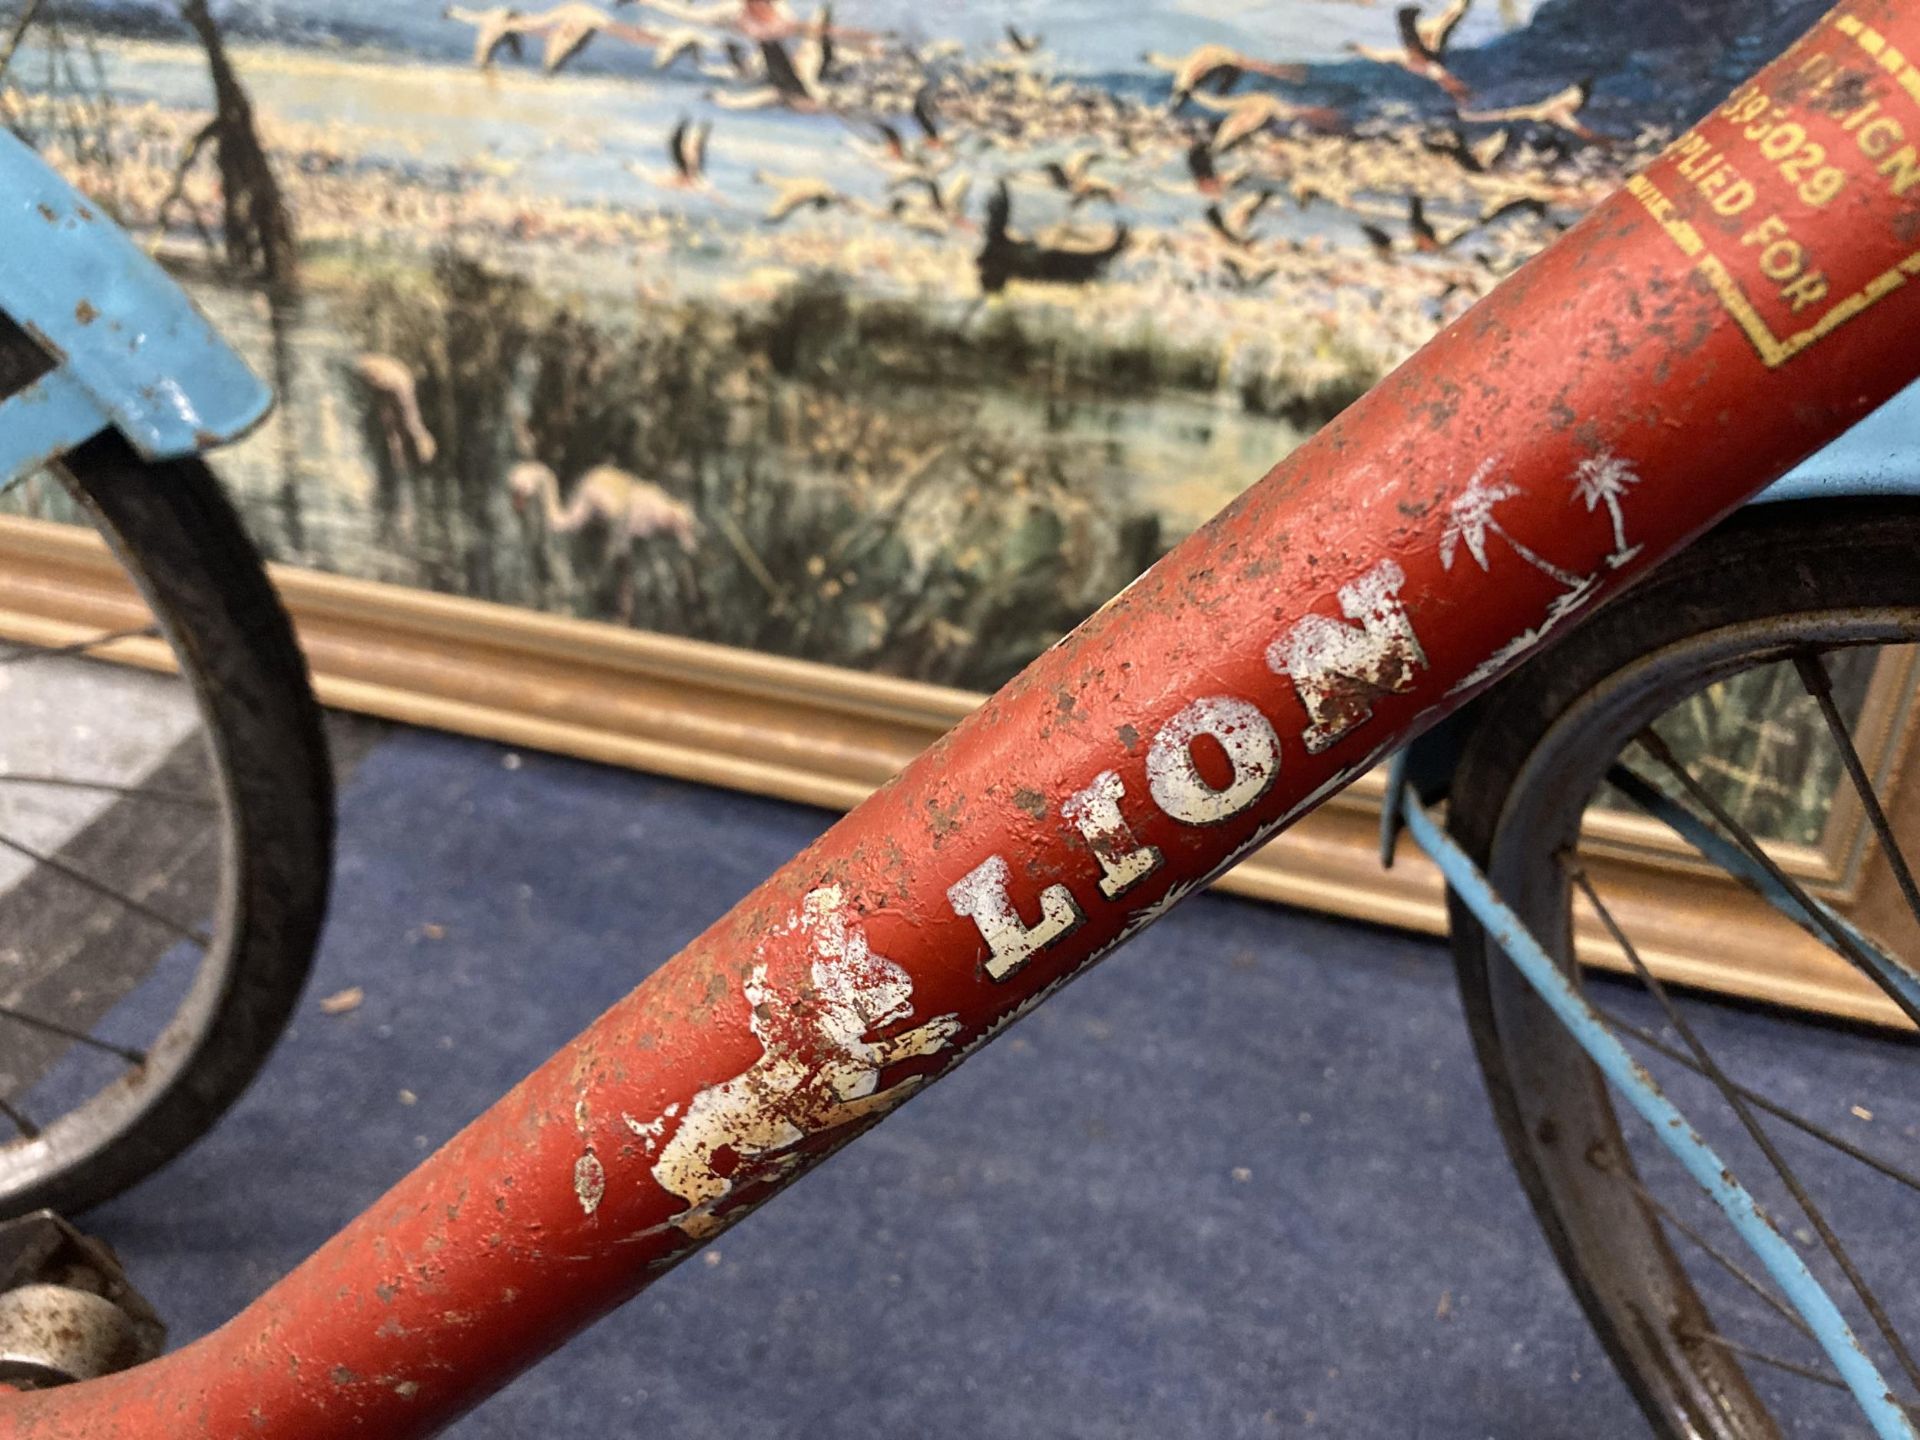 A VINTAGE LION CHILD'S TRICYCLE - Image 4 of 5